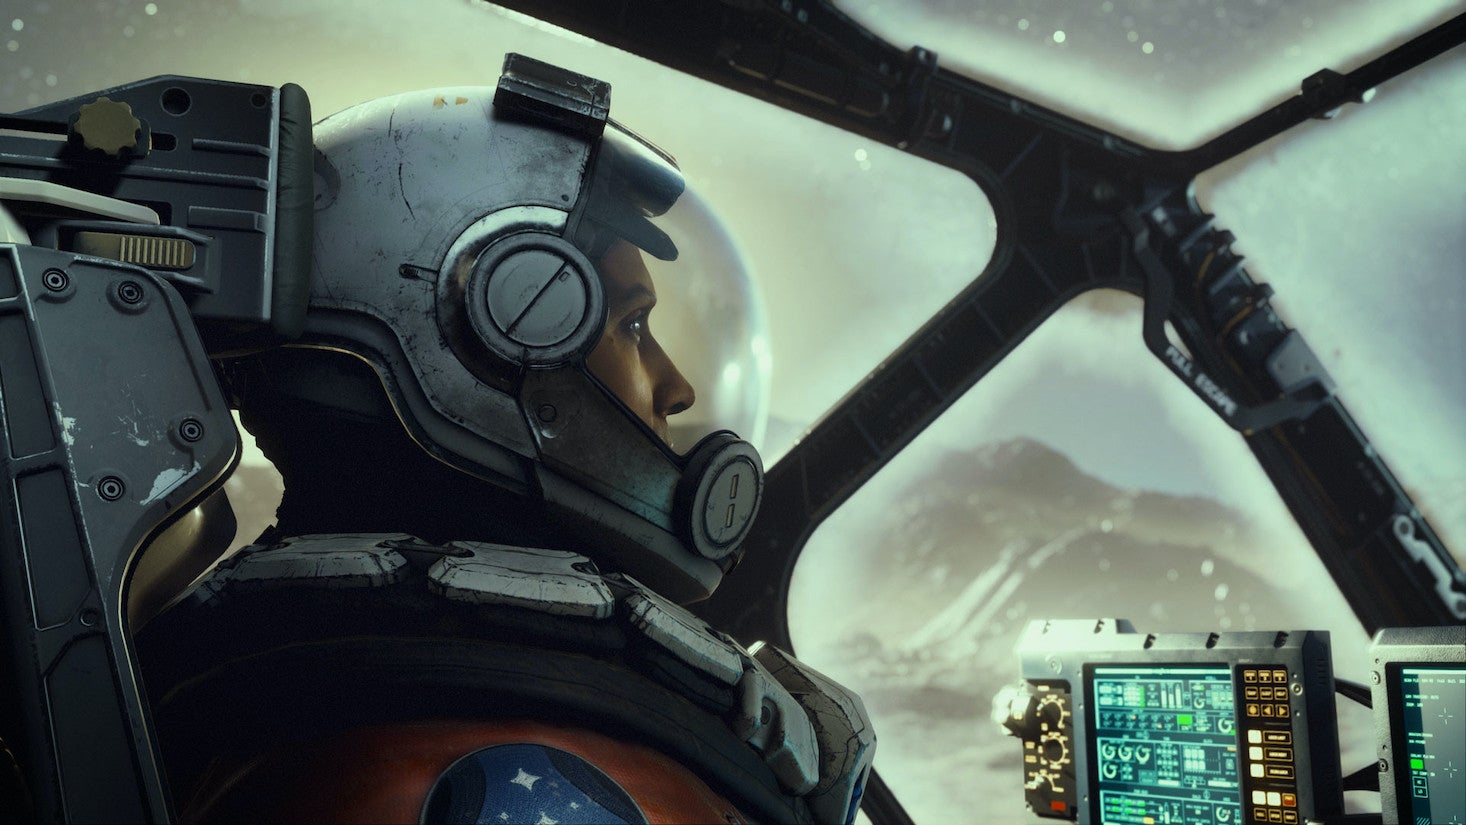 Artwork for Starfield that shows an astronaut sitting in profile inside a space ship